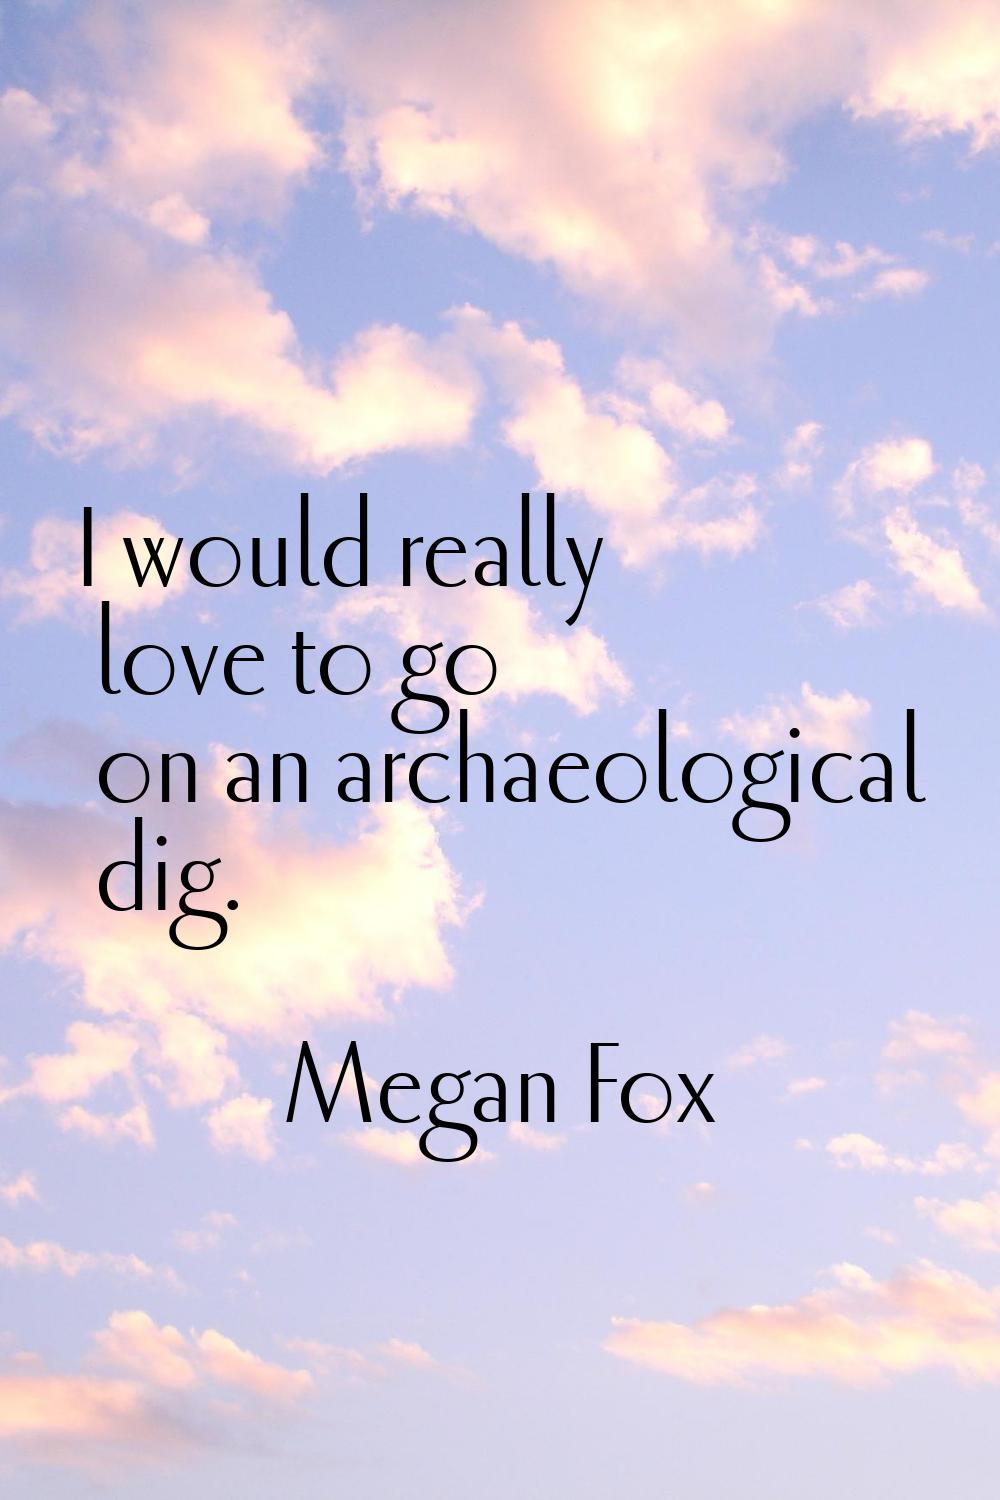 I would really love to go on an archaeological dig.